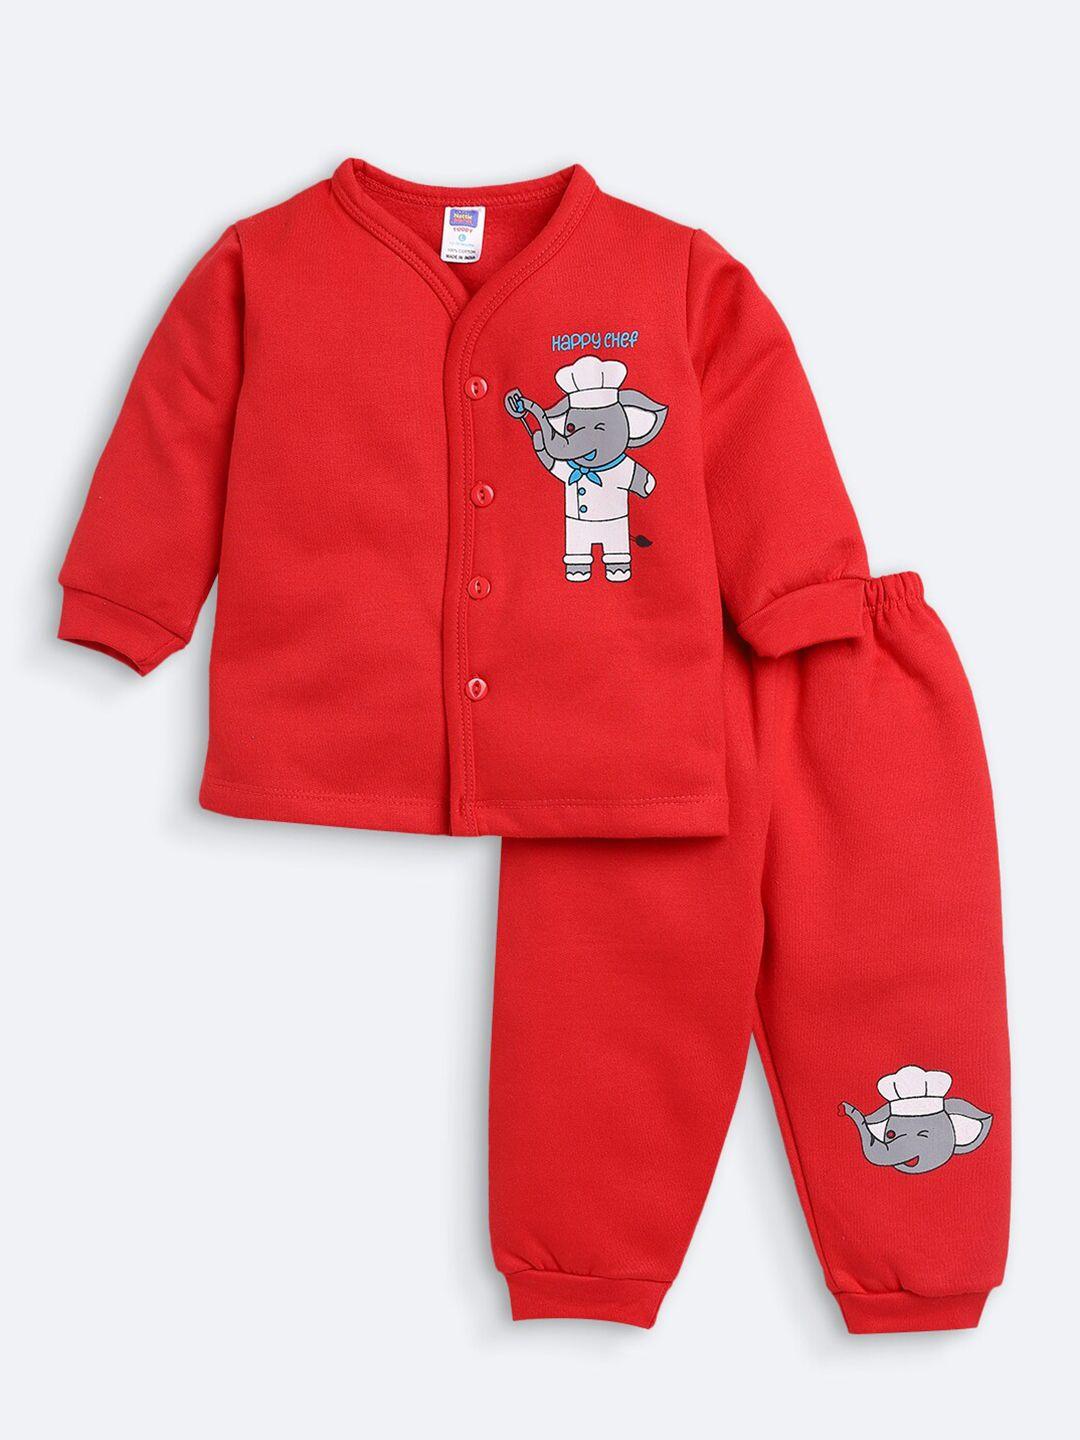 nottie-planet-kids-red-&-white-printed-pure-cotton-clothing-set